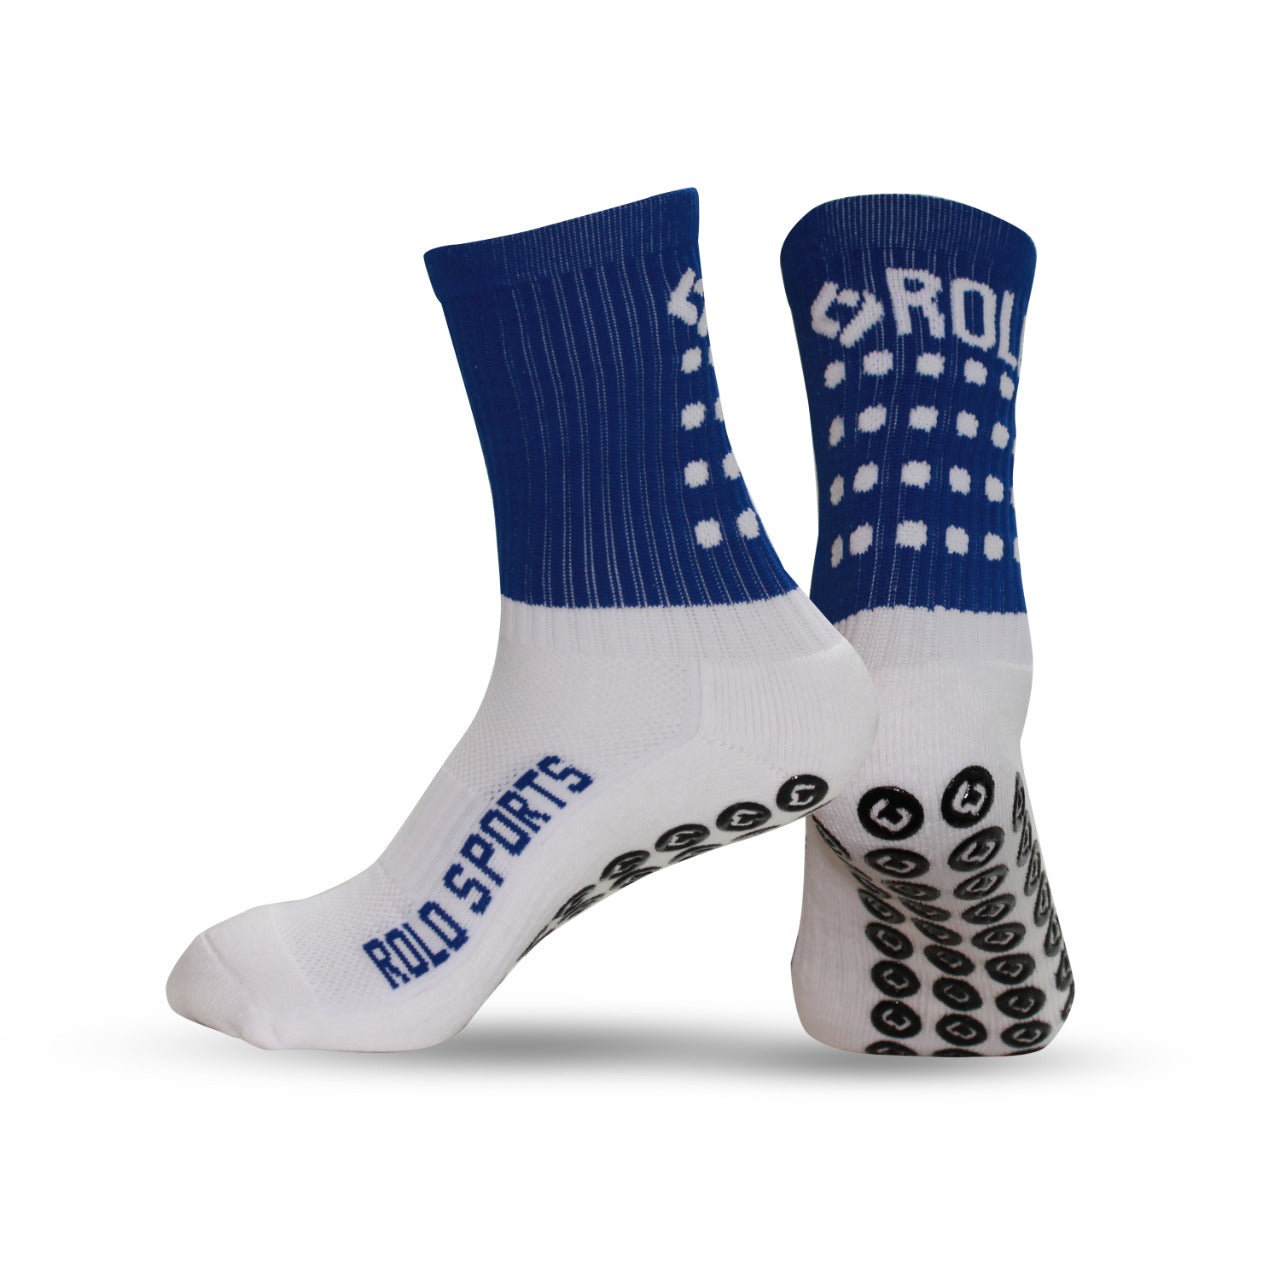 Blue and White Sock Bundle